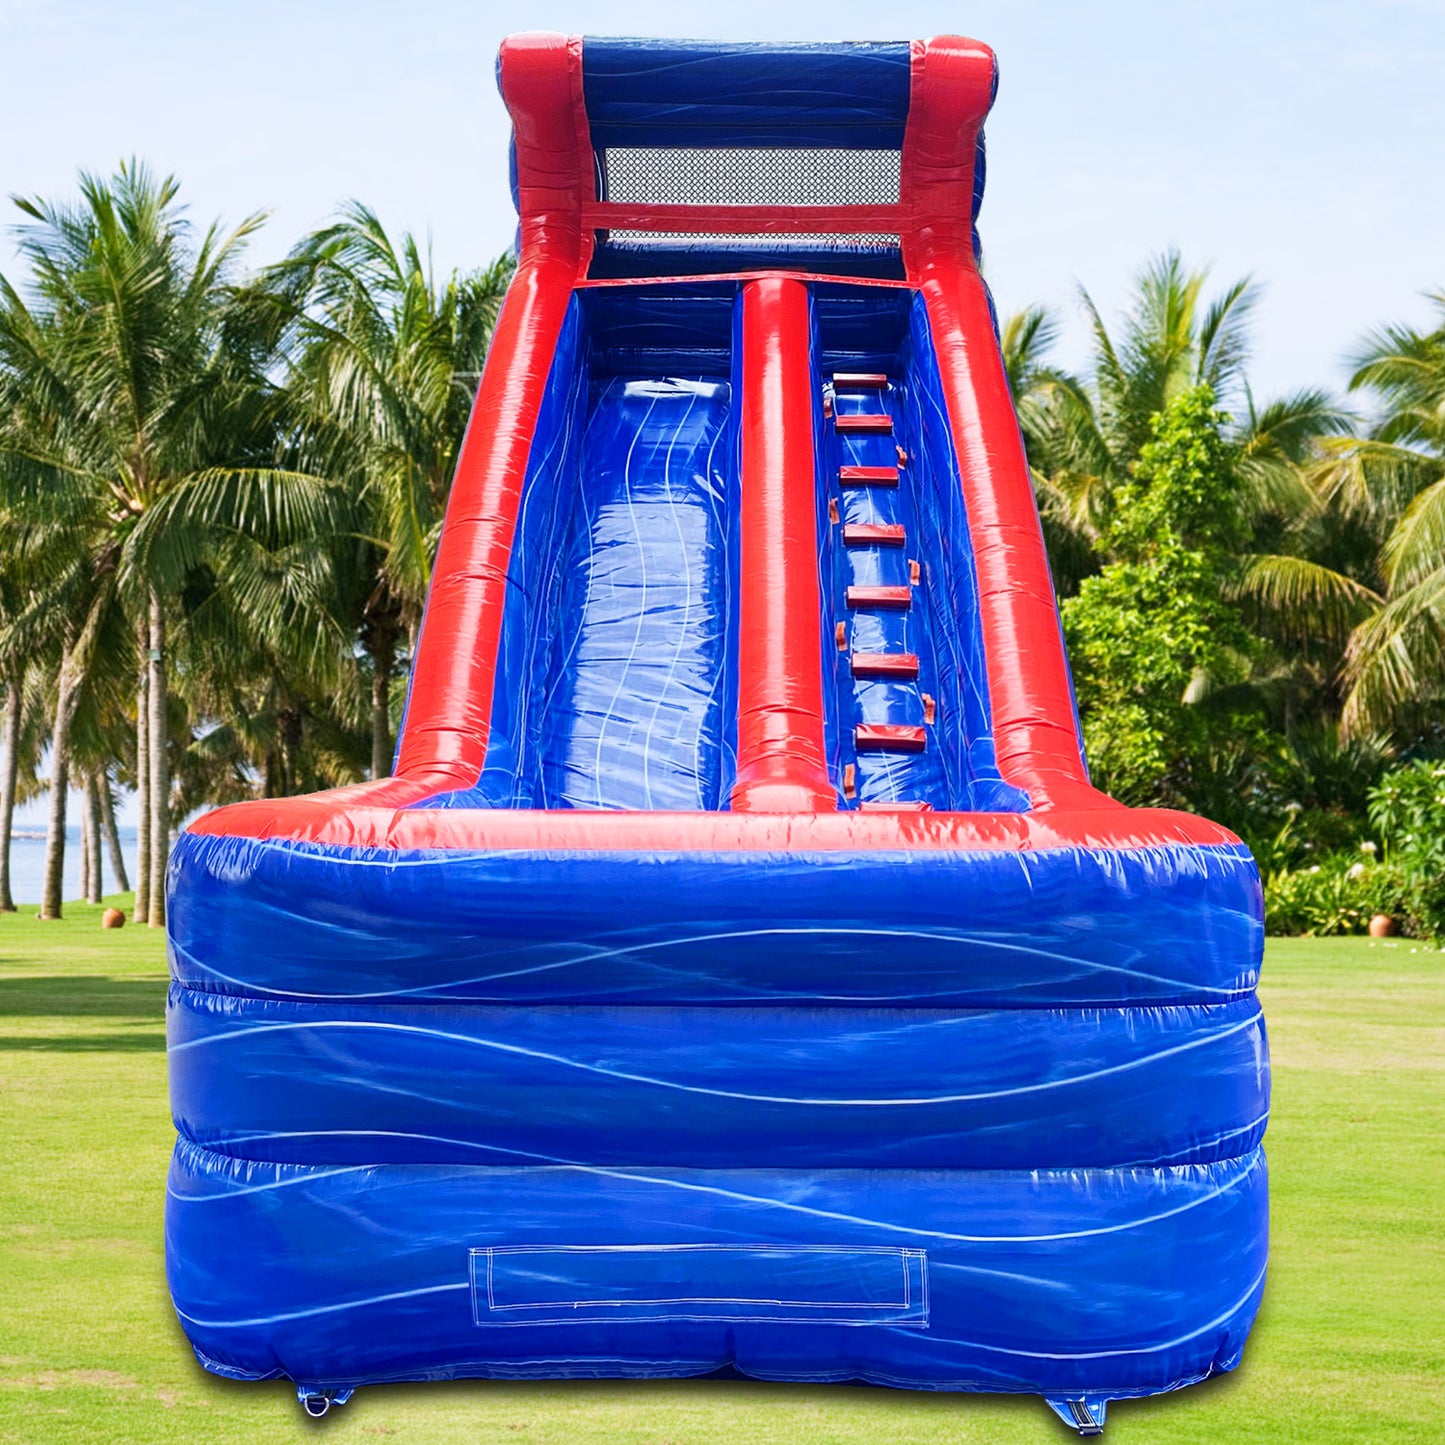 26' x 12' x 17' Wet/Dry Commercial-grade Inflatable Water Slide #11189